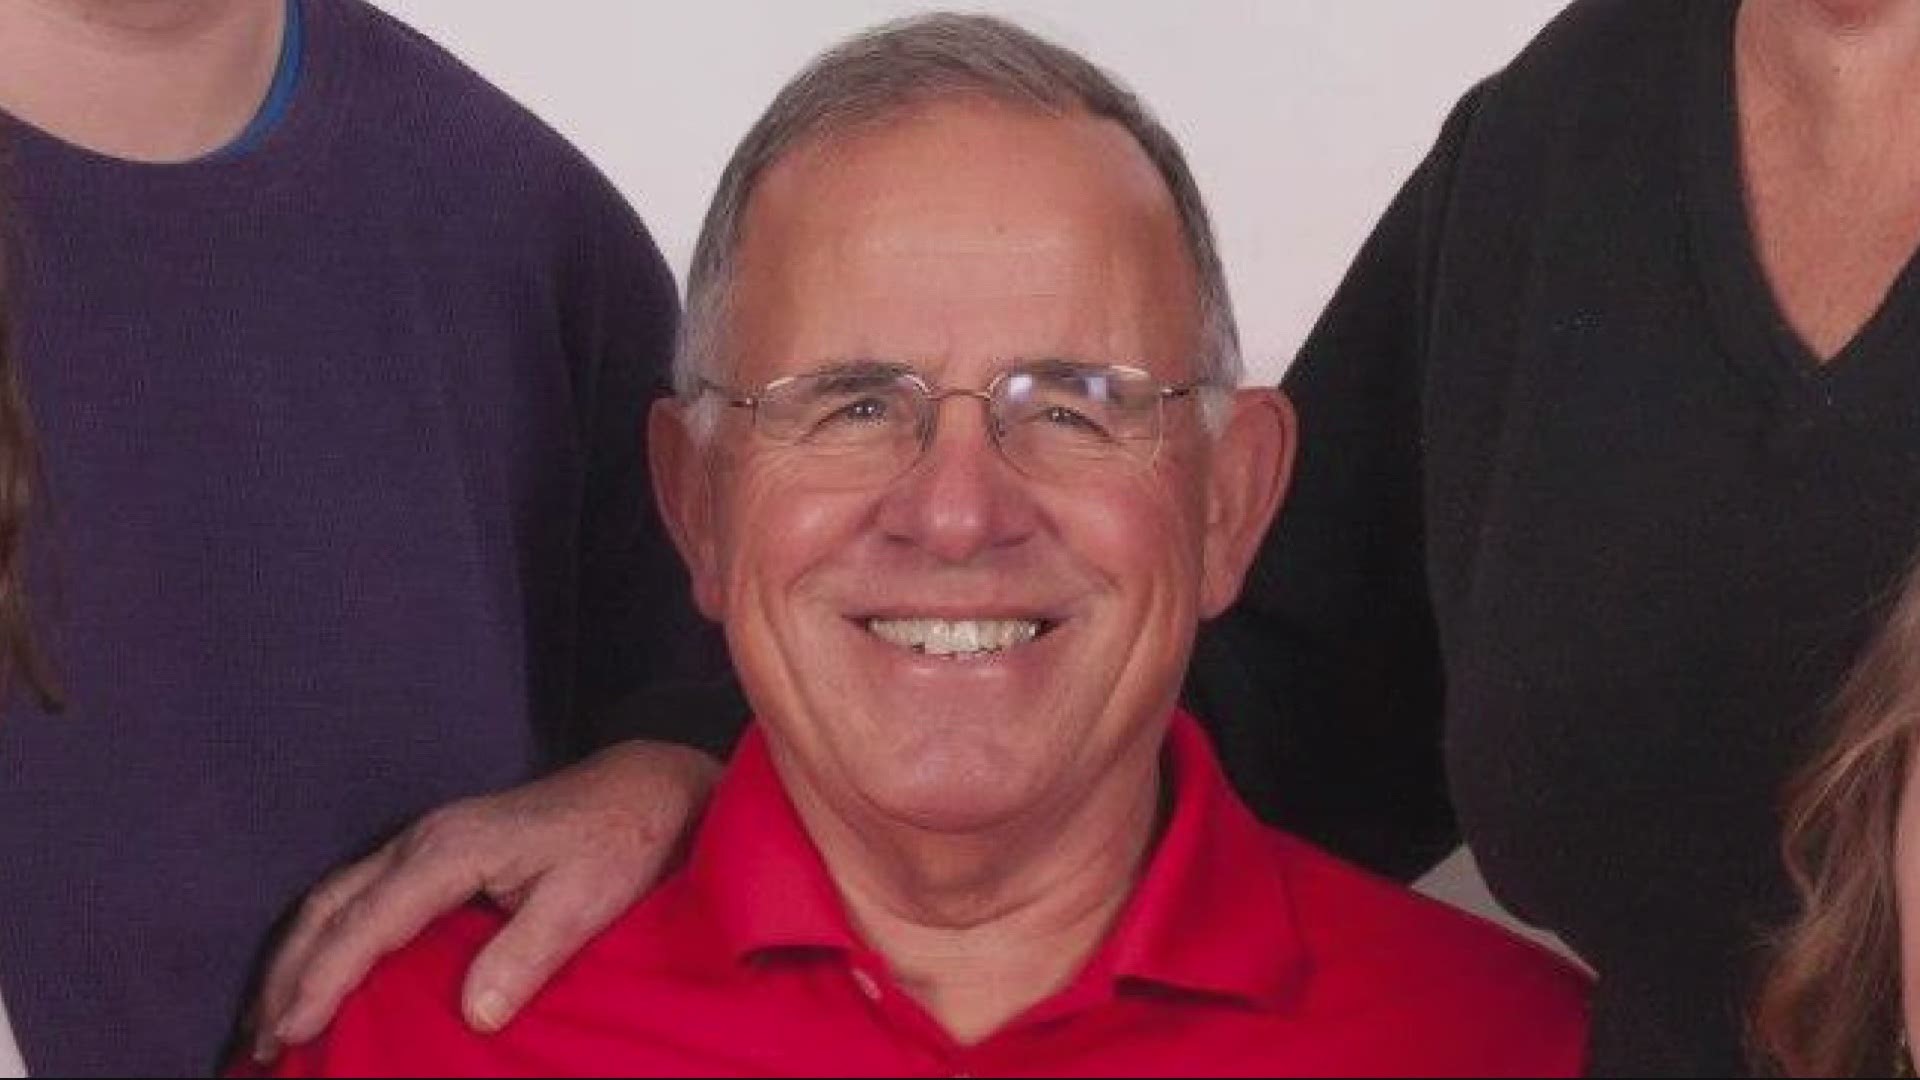 The former mayor of Cornelius, who now suffers from dementia, has been missing for 10 days. His family is asking people to keep looking for Ralph Brown.